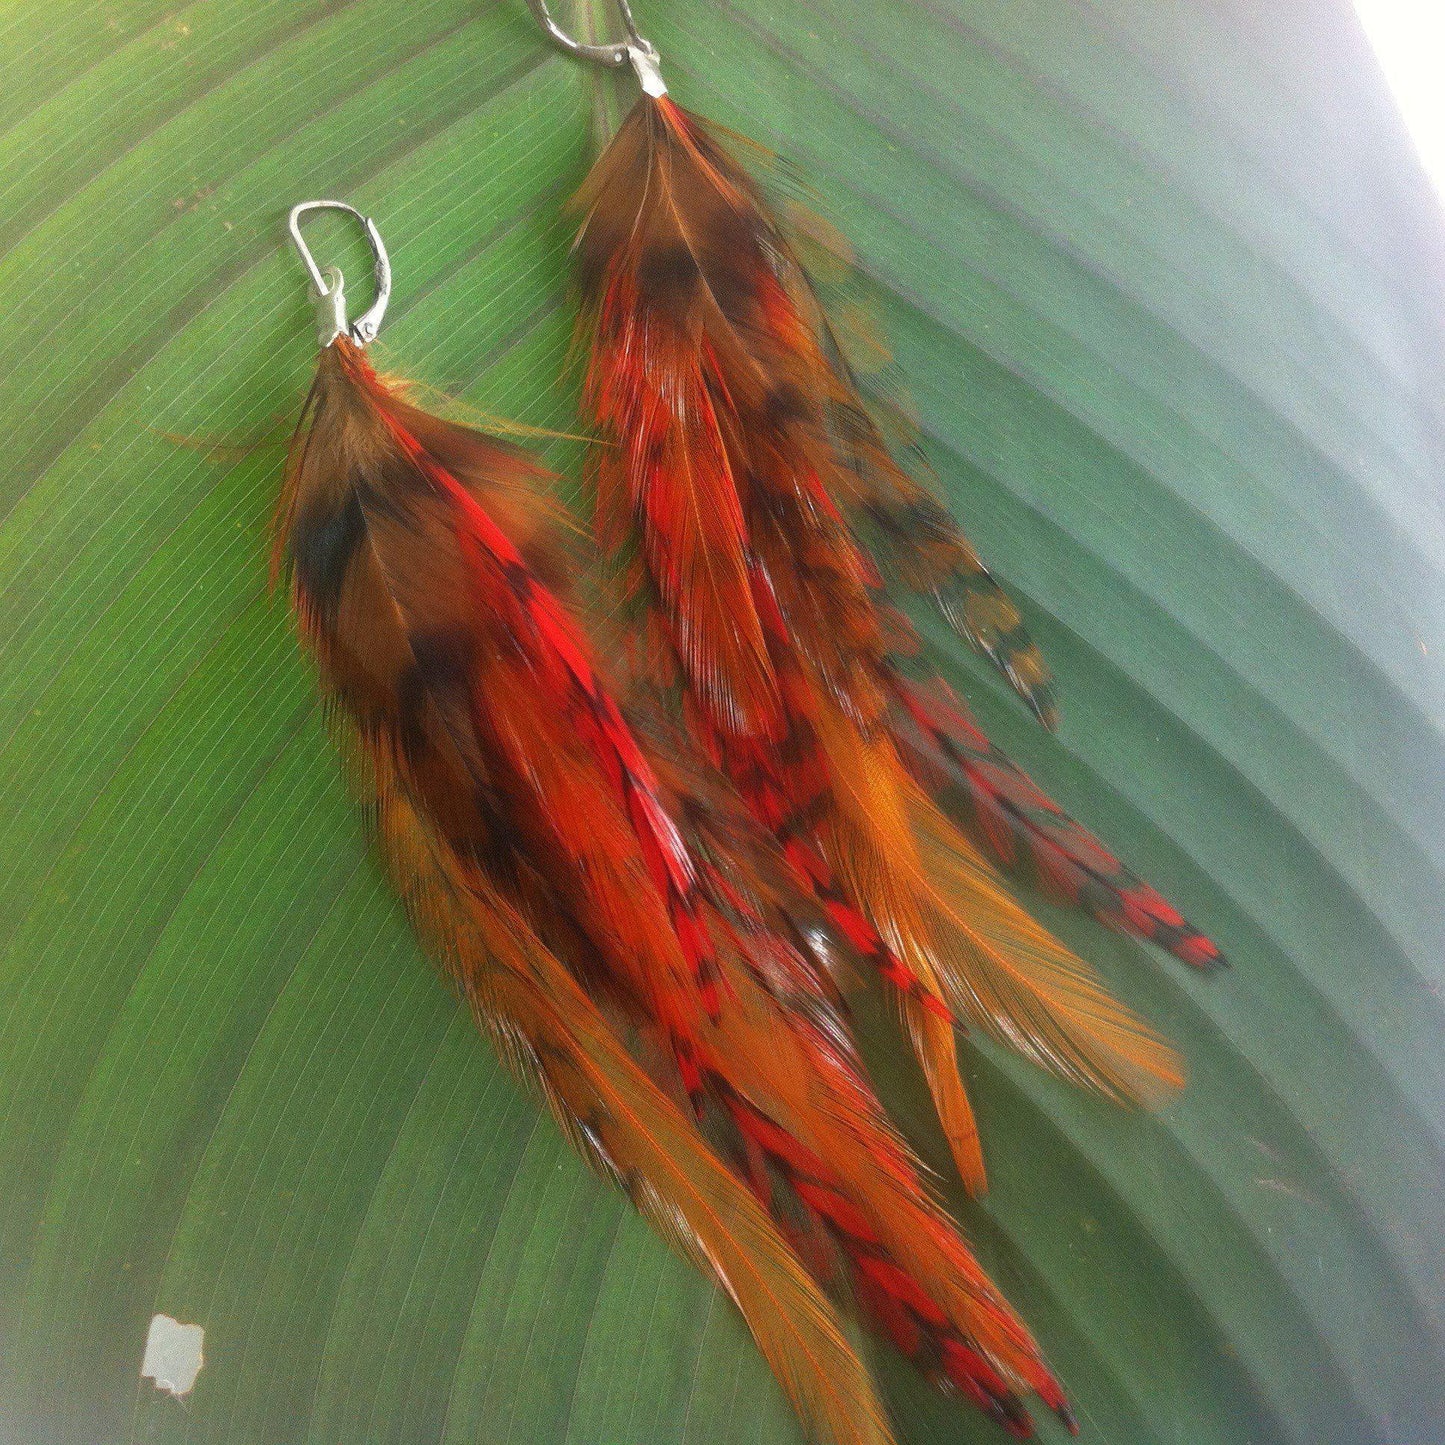 Natural Jewelry :|: Dragon Breath, Feather Earrings, 5 inch-6 inch Long. | Feather Earrings